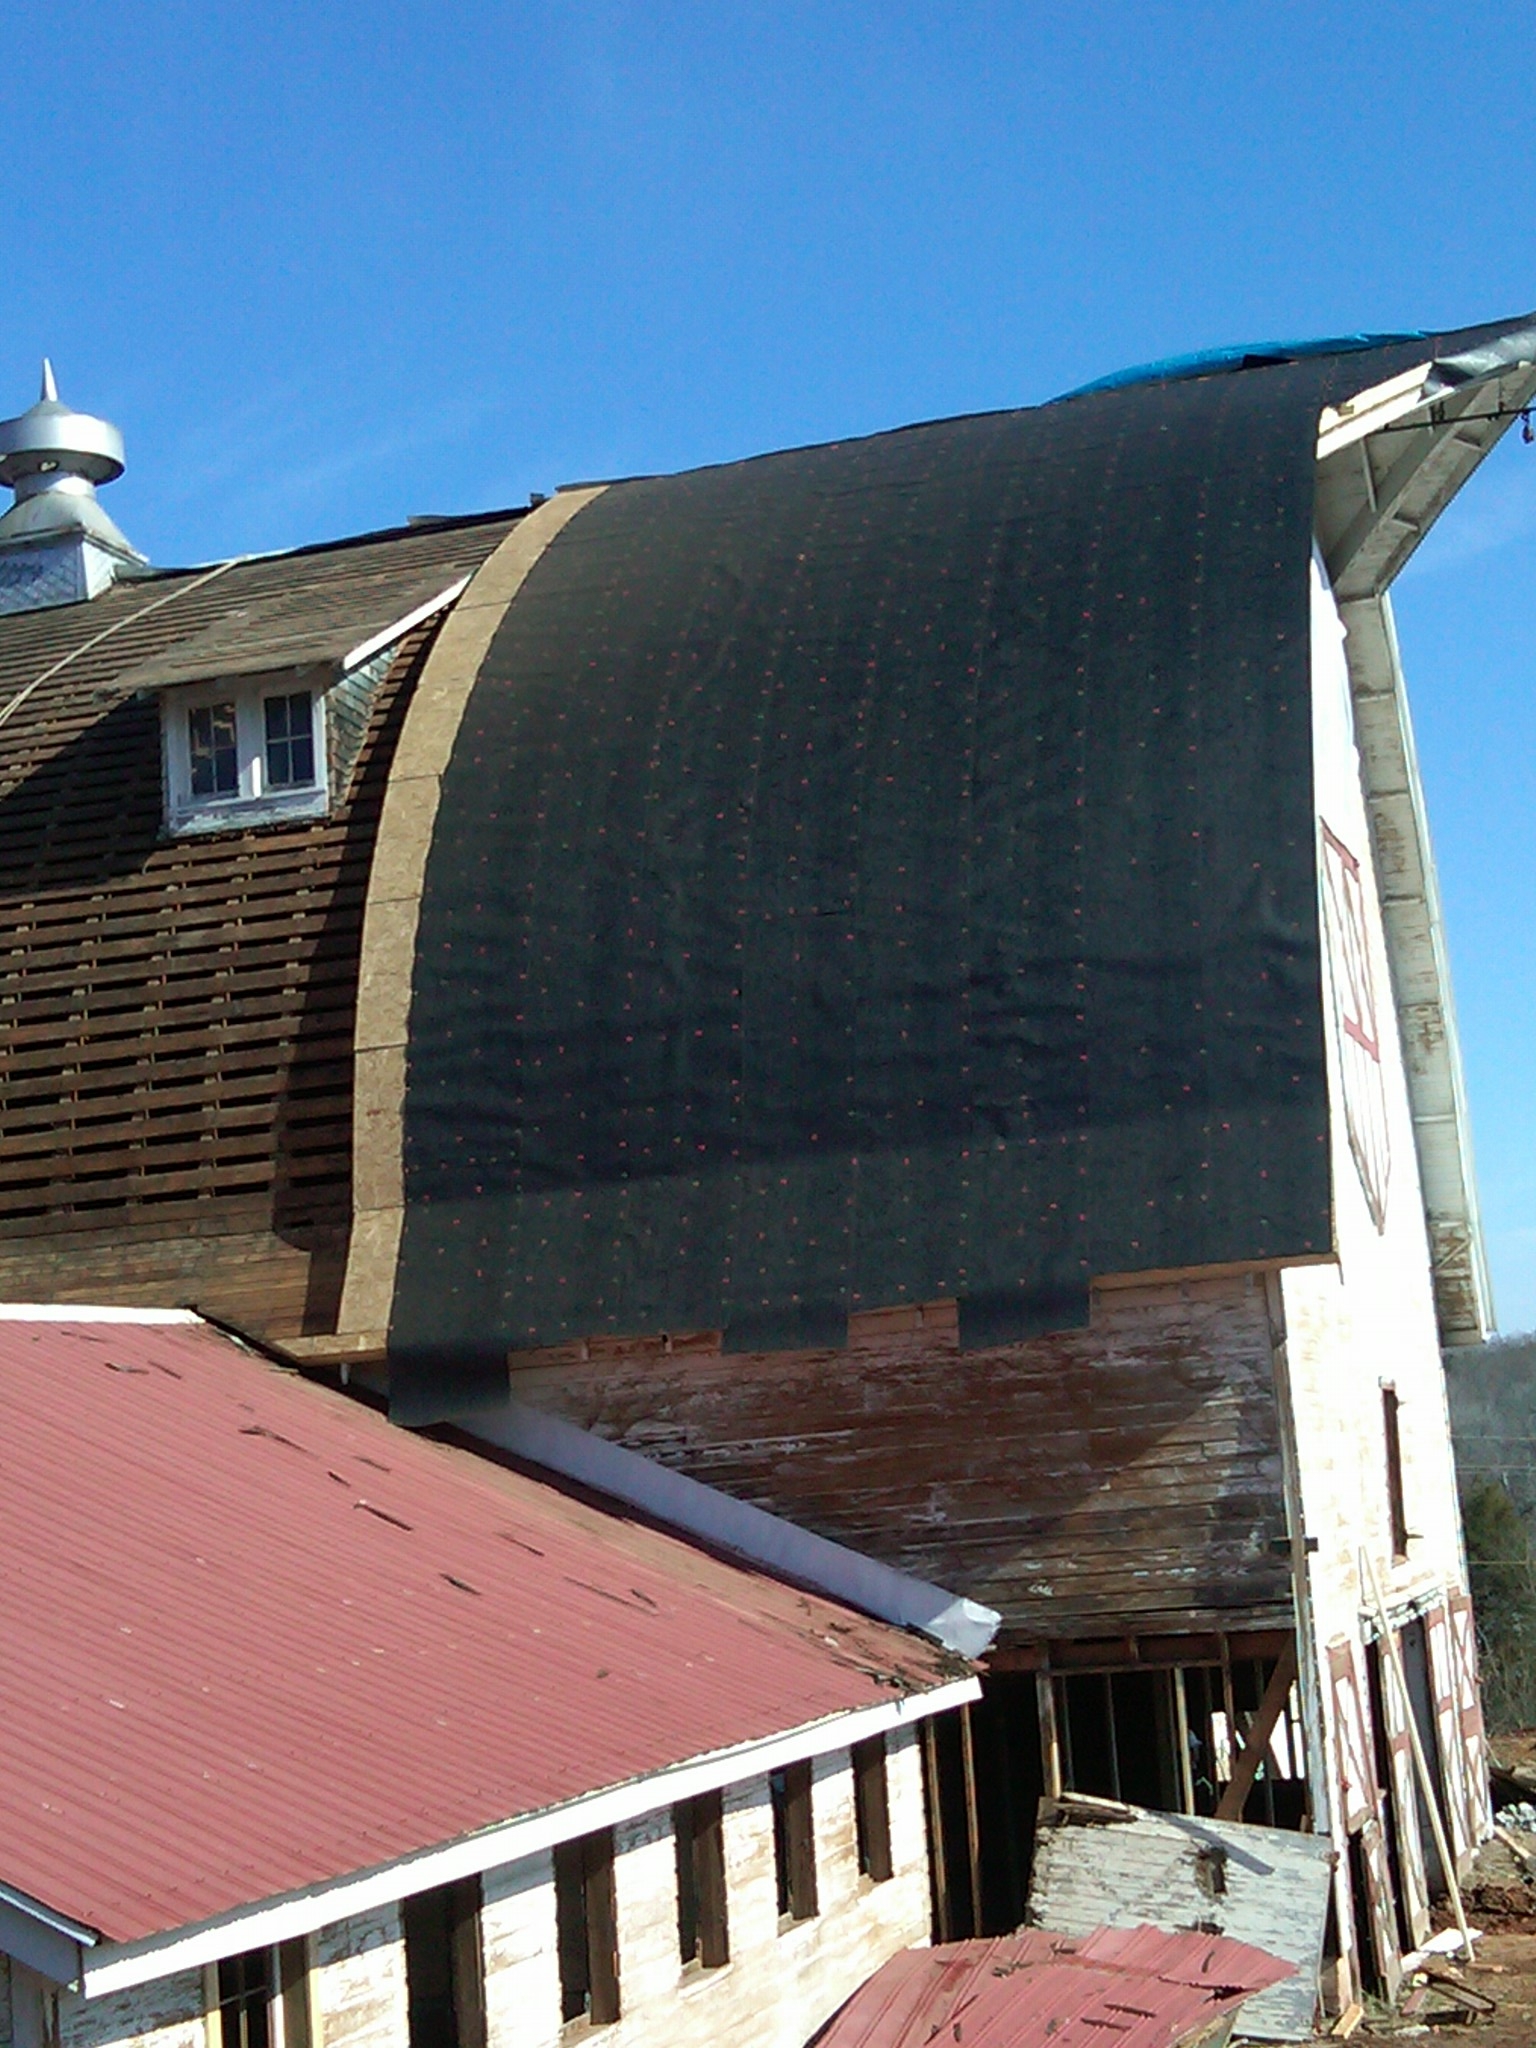 The barn's roof is being carefully removed and replaced, section by section